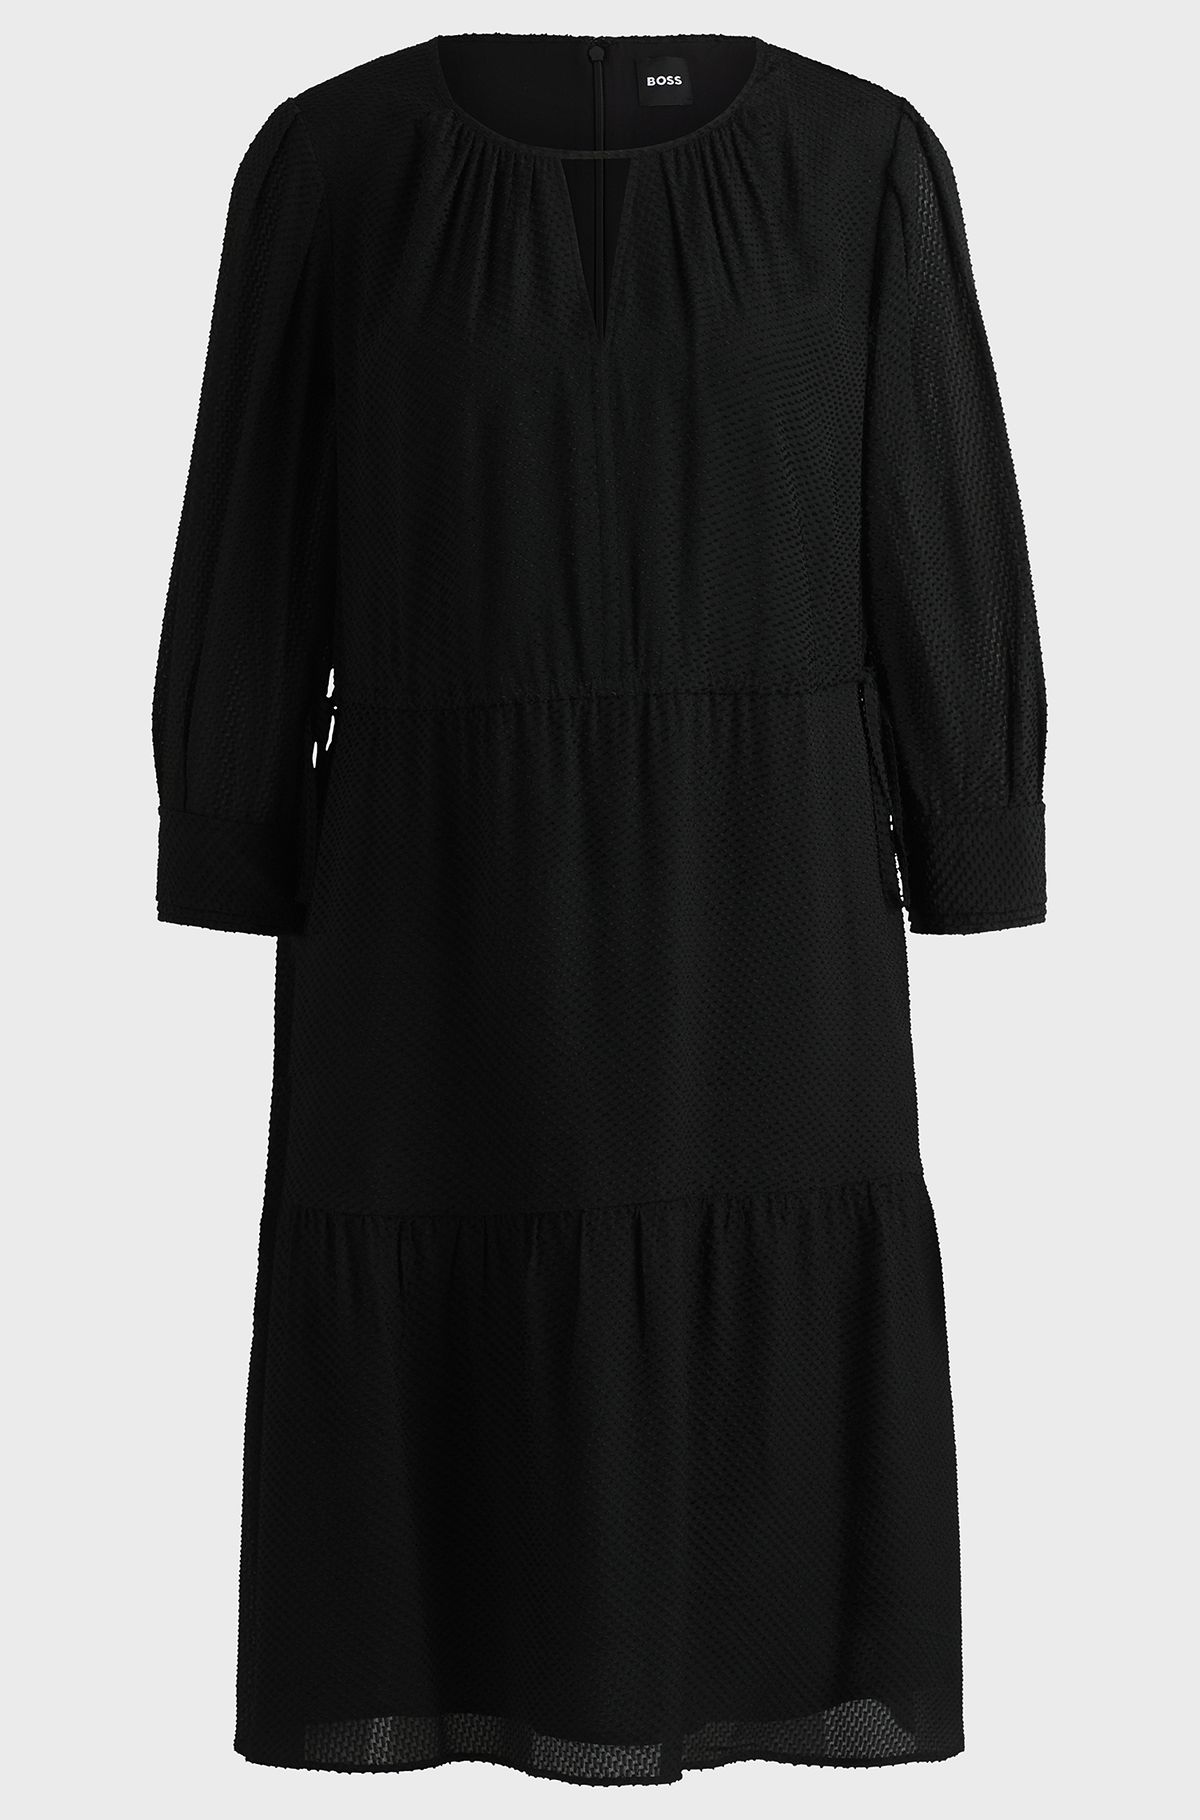 Long-sleeved dress in fil-coupé fabric, Black